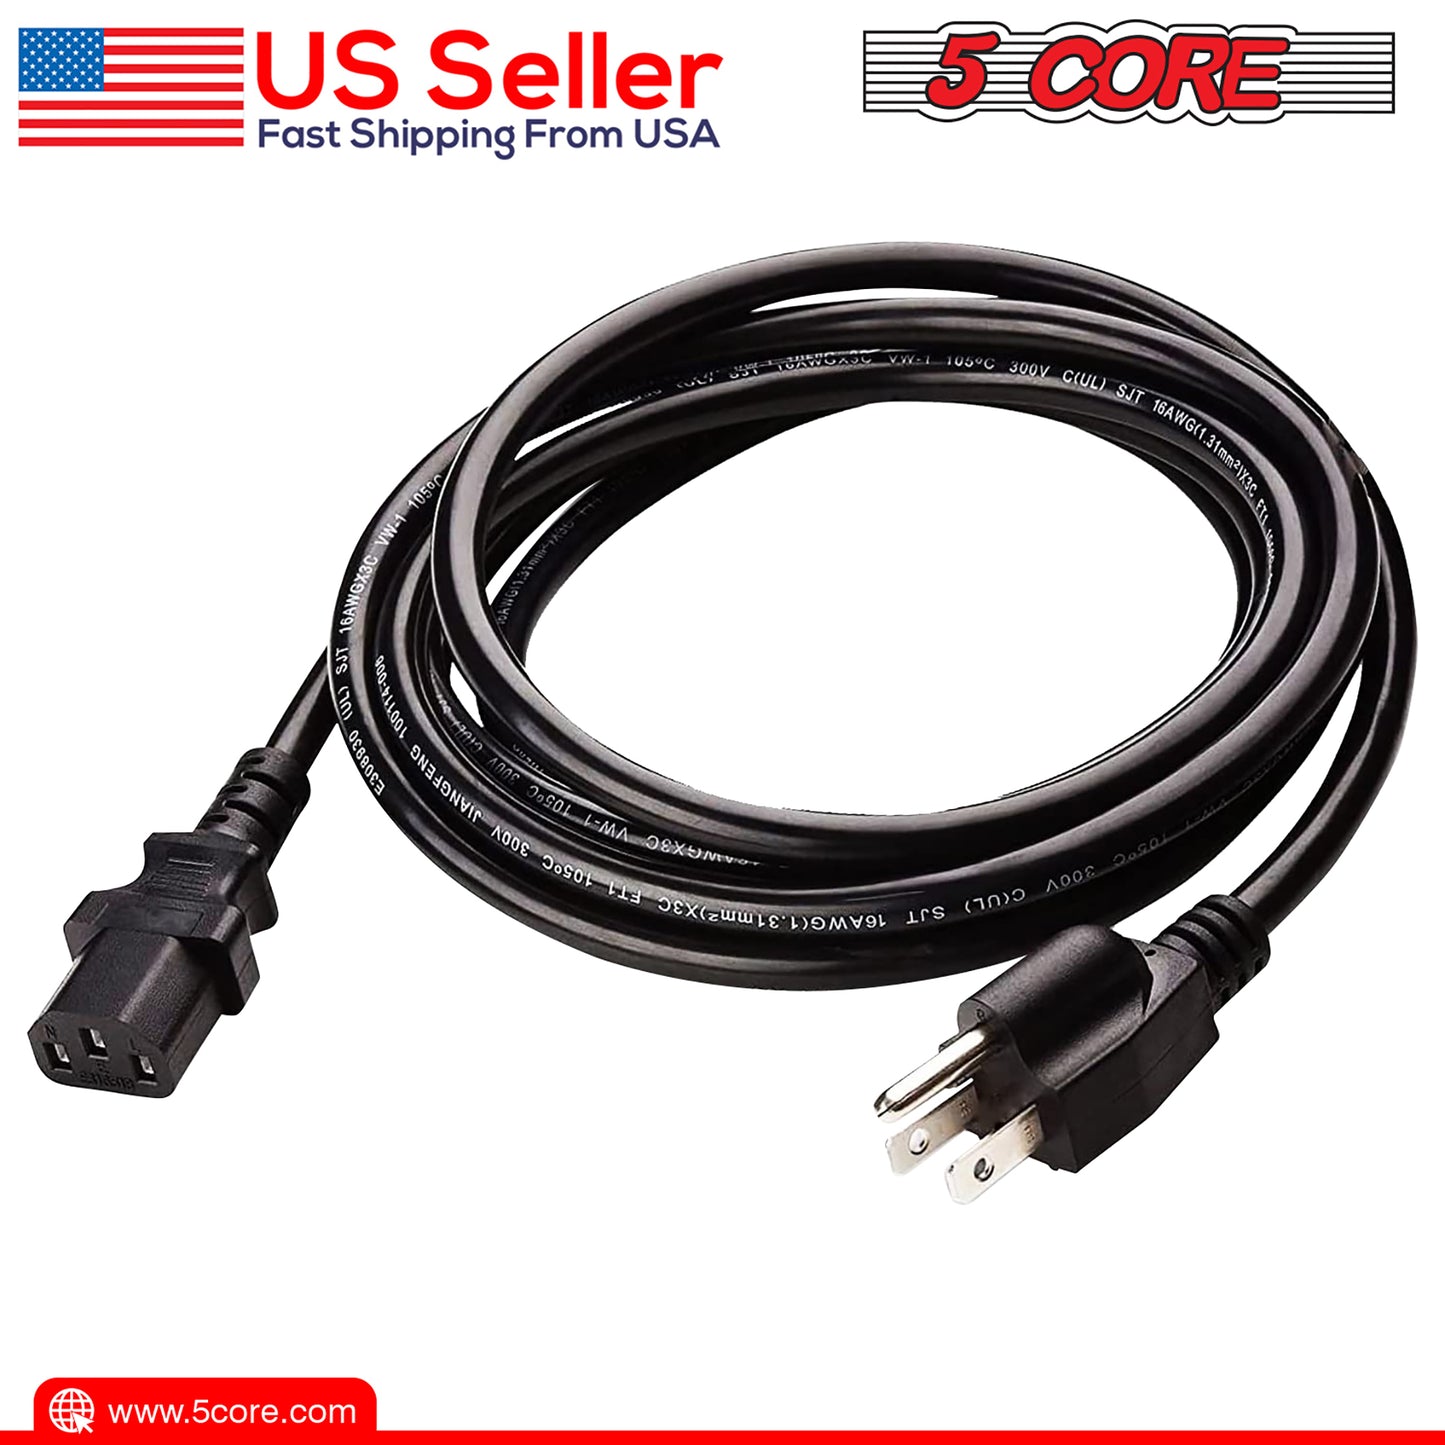 Durable power cord